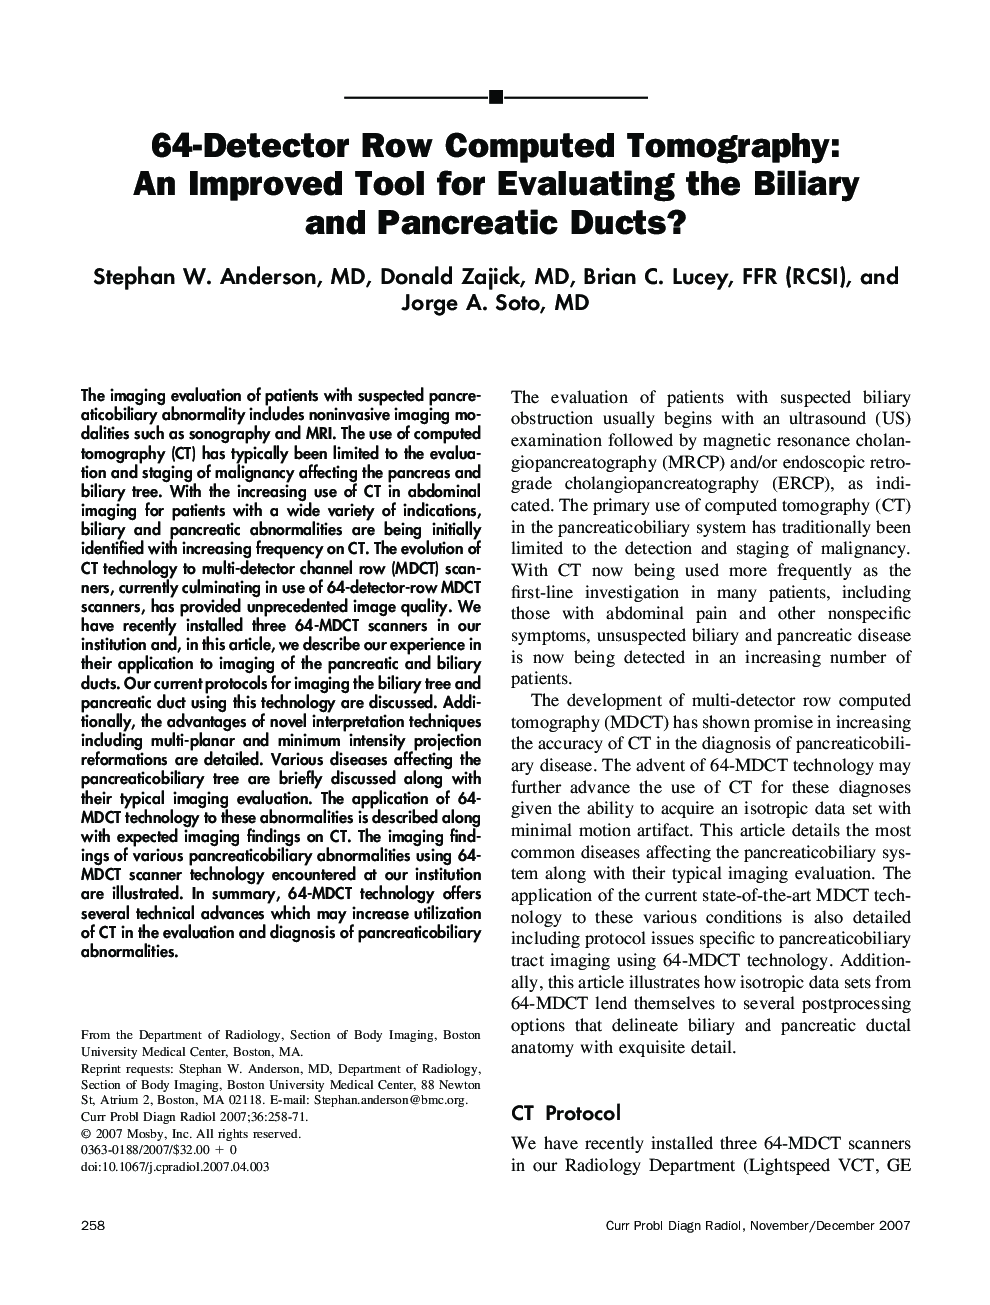 64-Detector Row Computed Tomography: An Improved Tool for Evaluating the Biliary and Pancreatic Ducts?